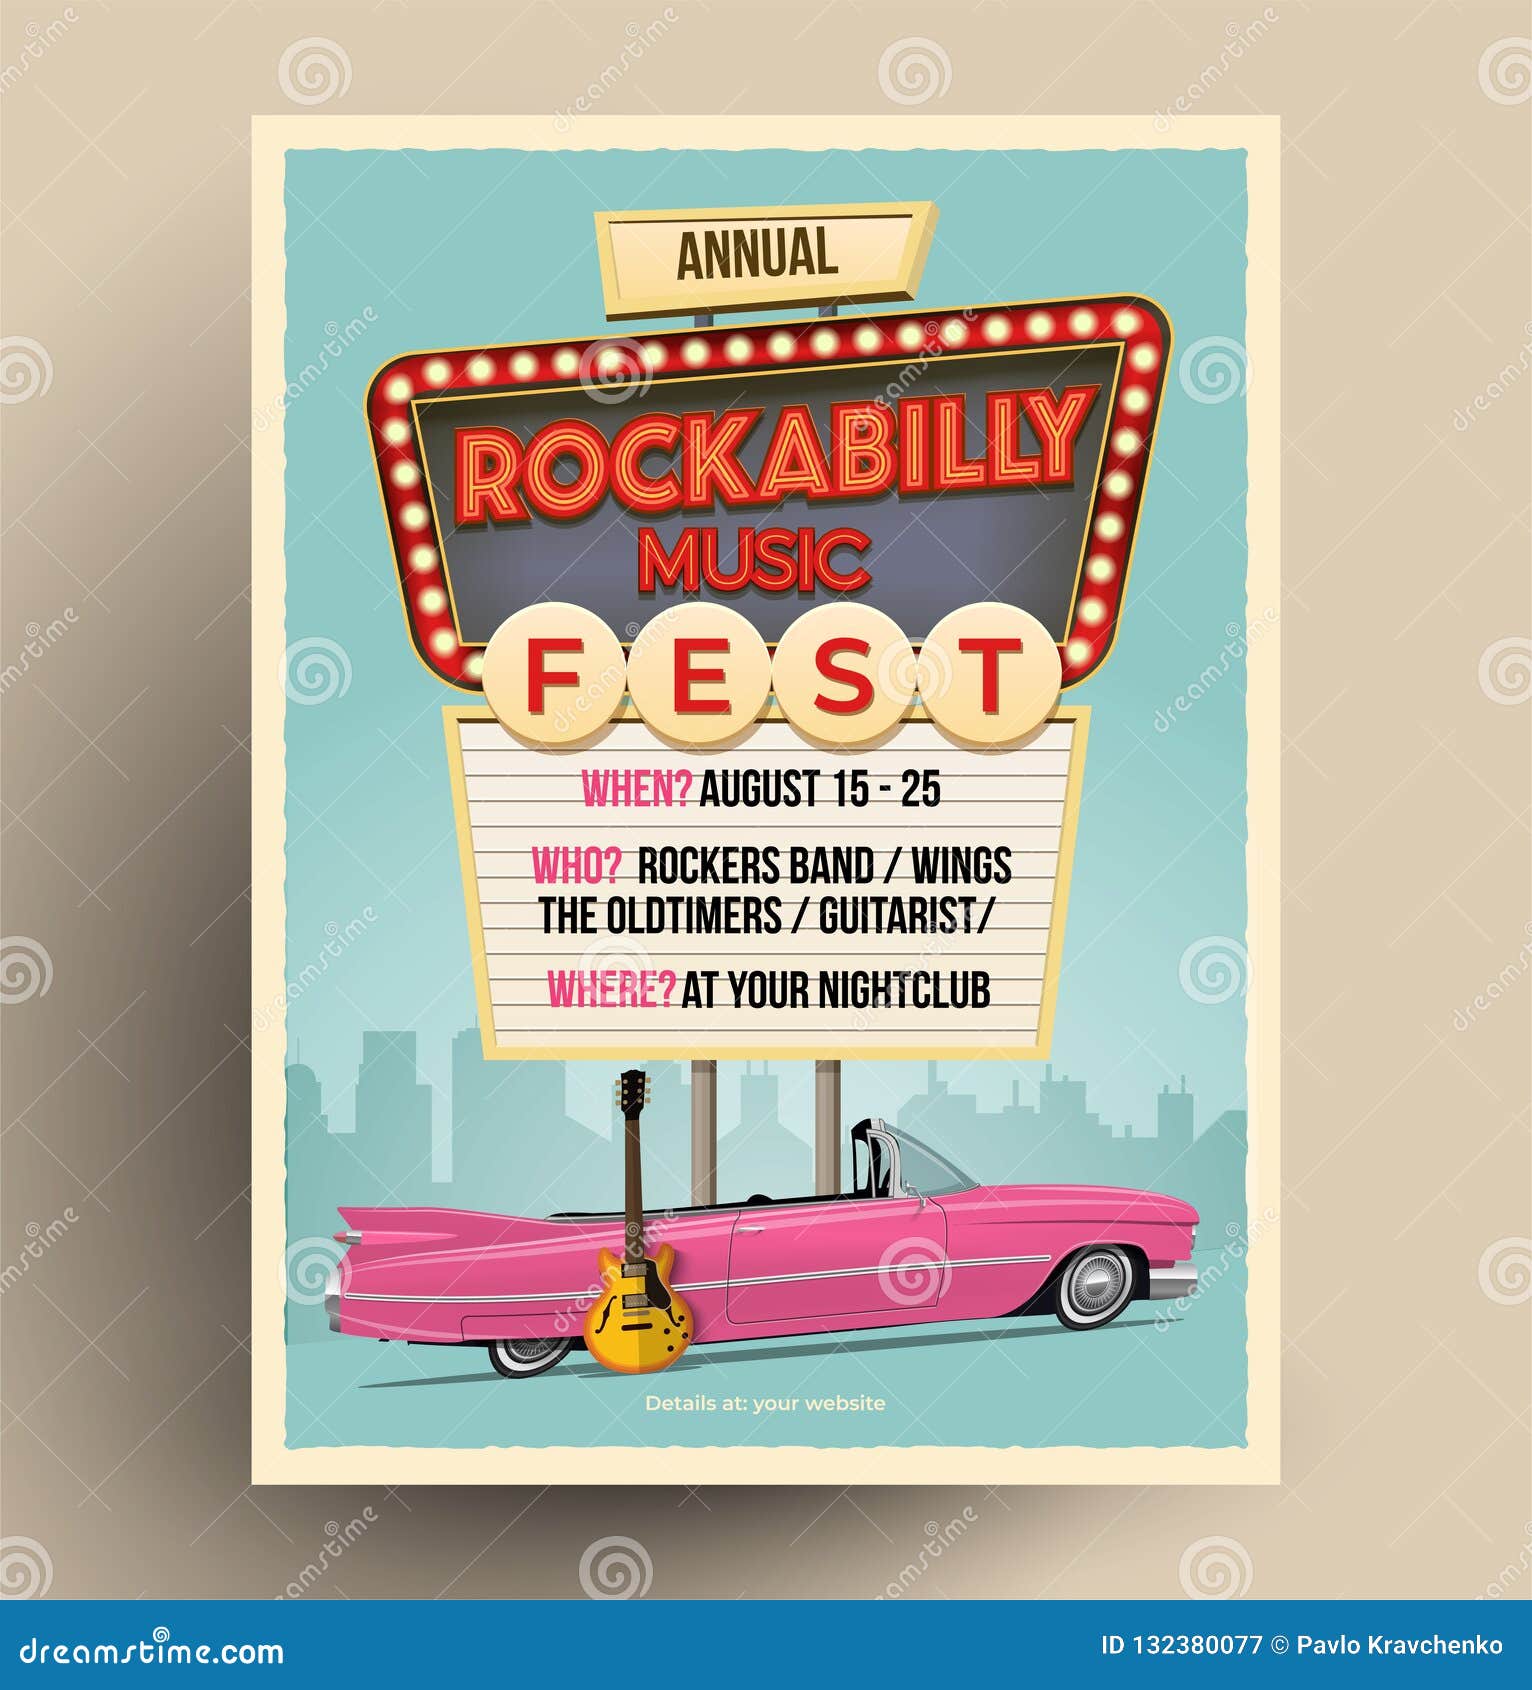 rockabilly music festival or party or concert promo poster. flyer template. vintage  .